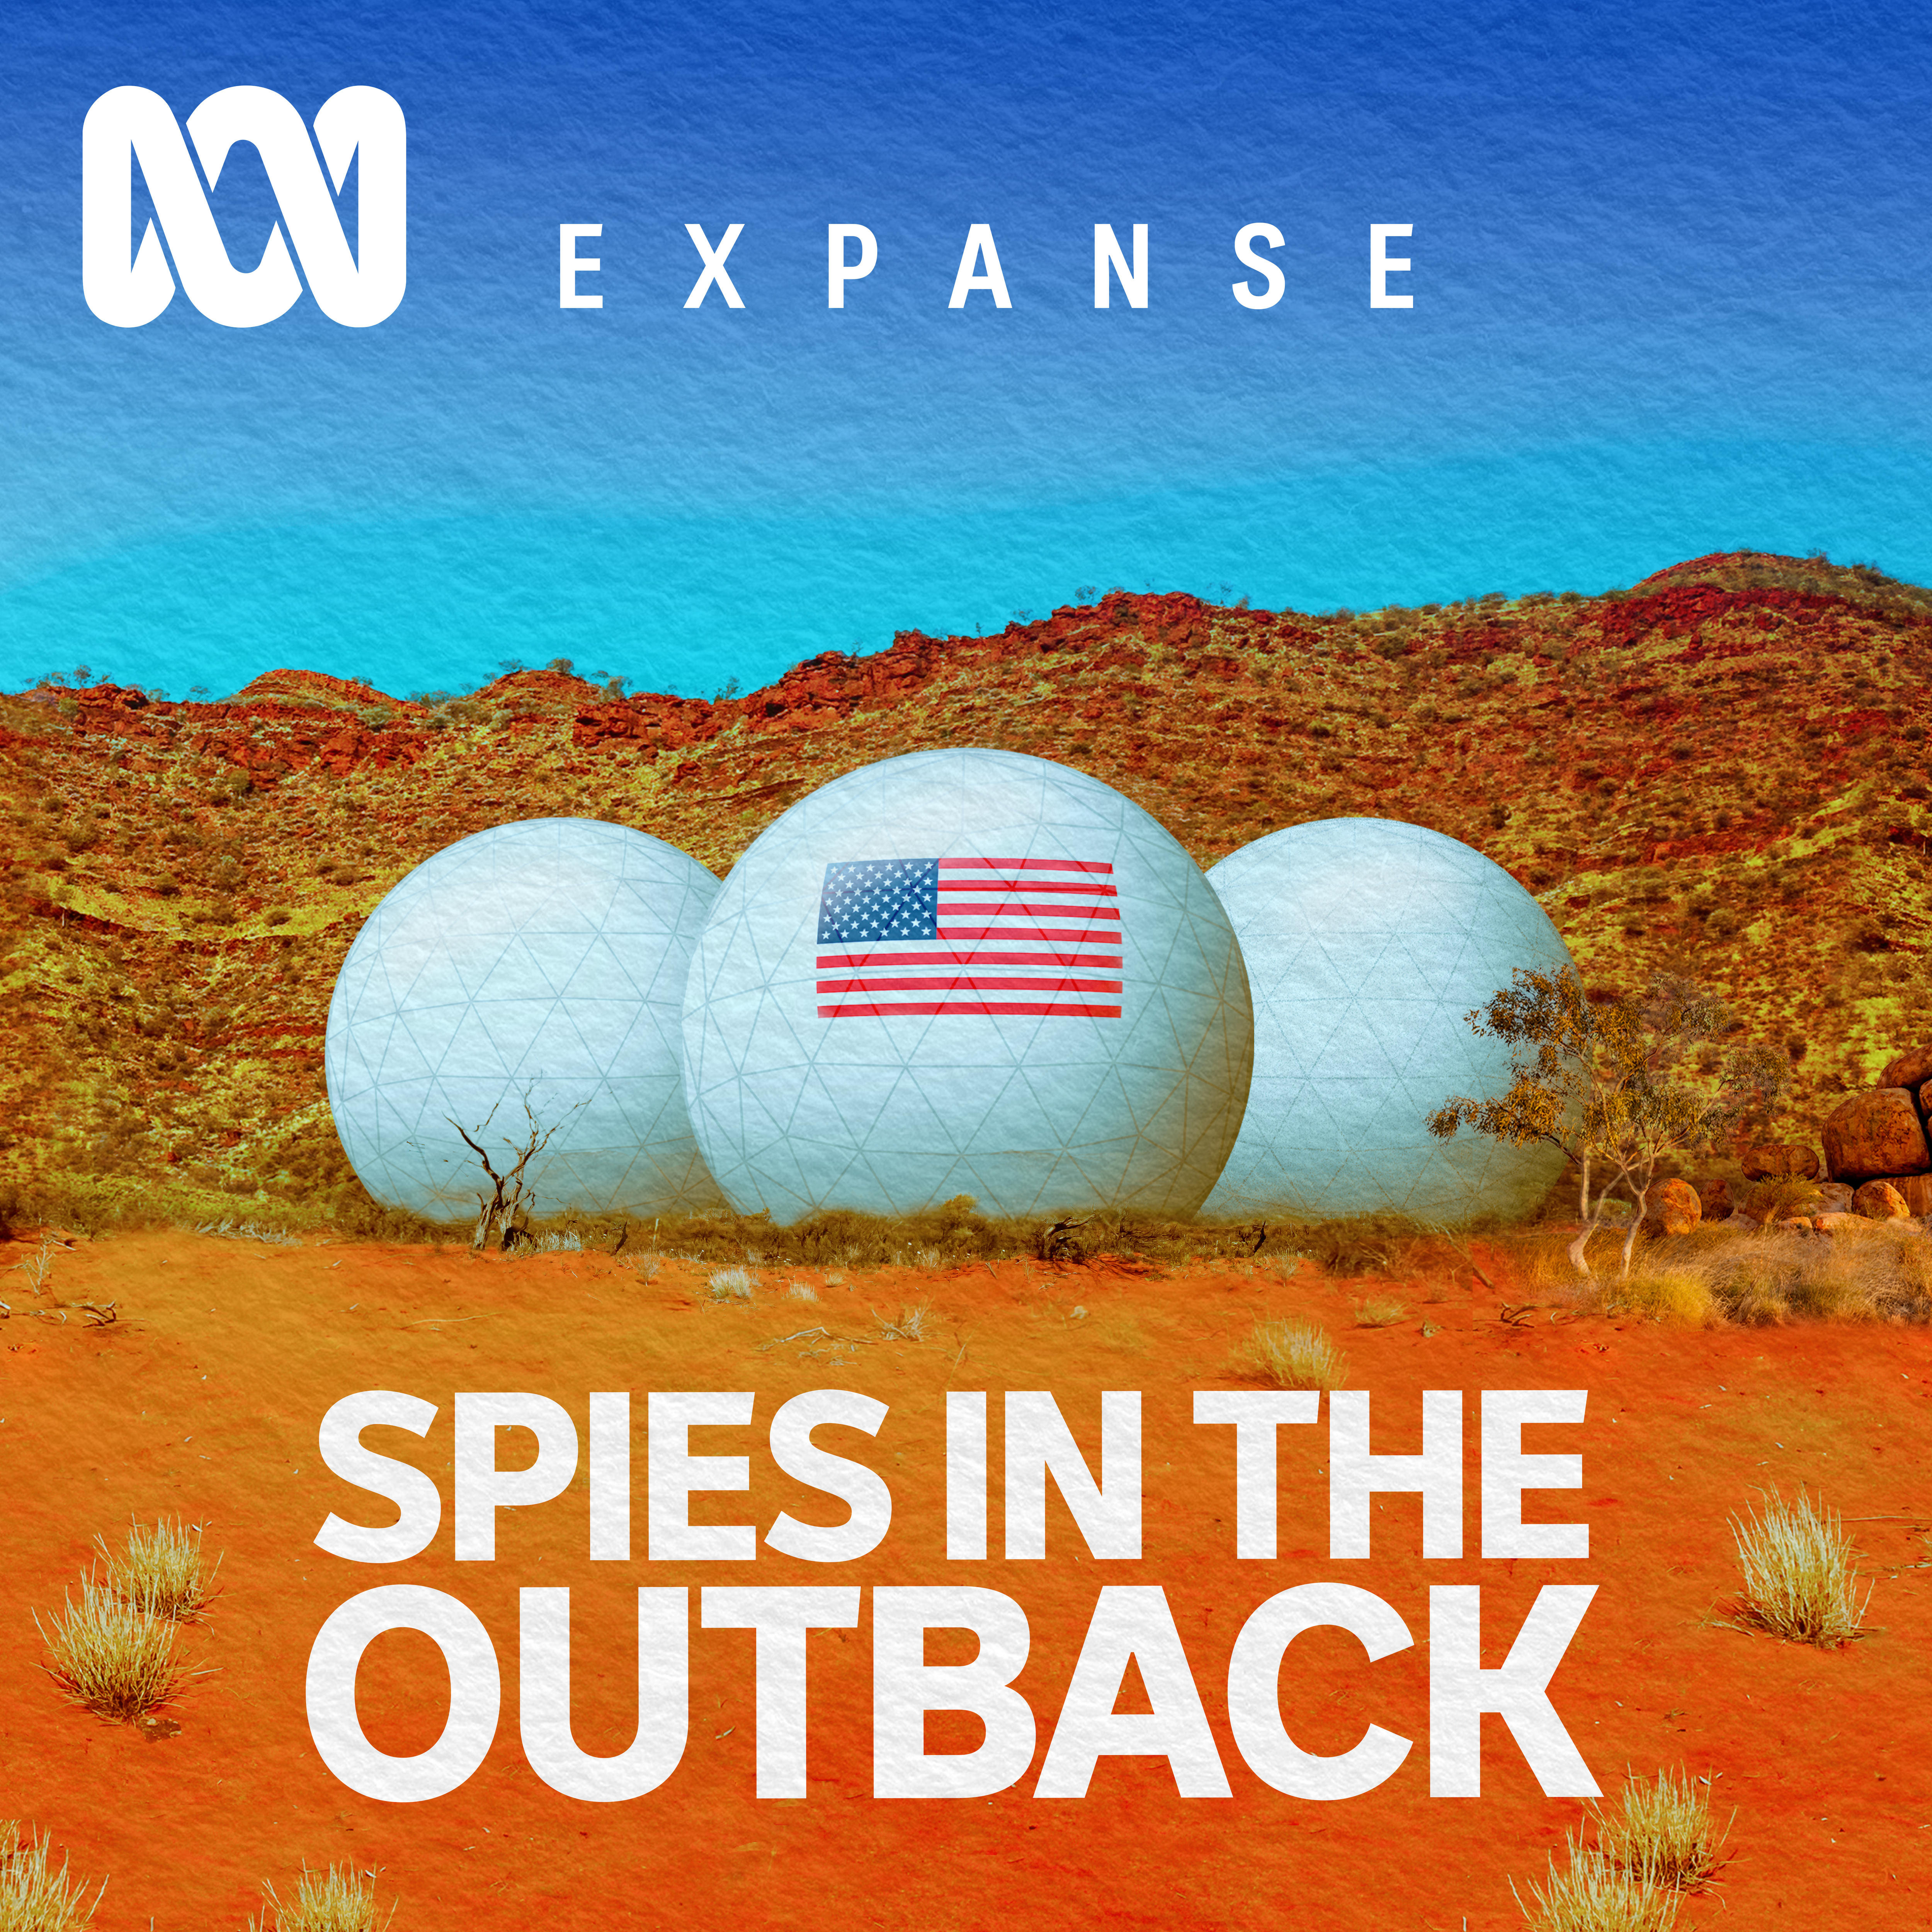 01 Spies in the Outback | Selling a space base